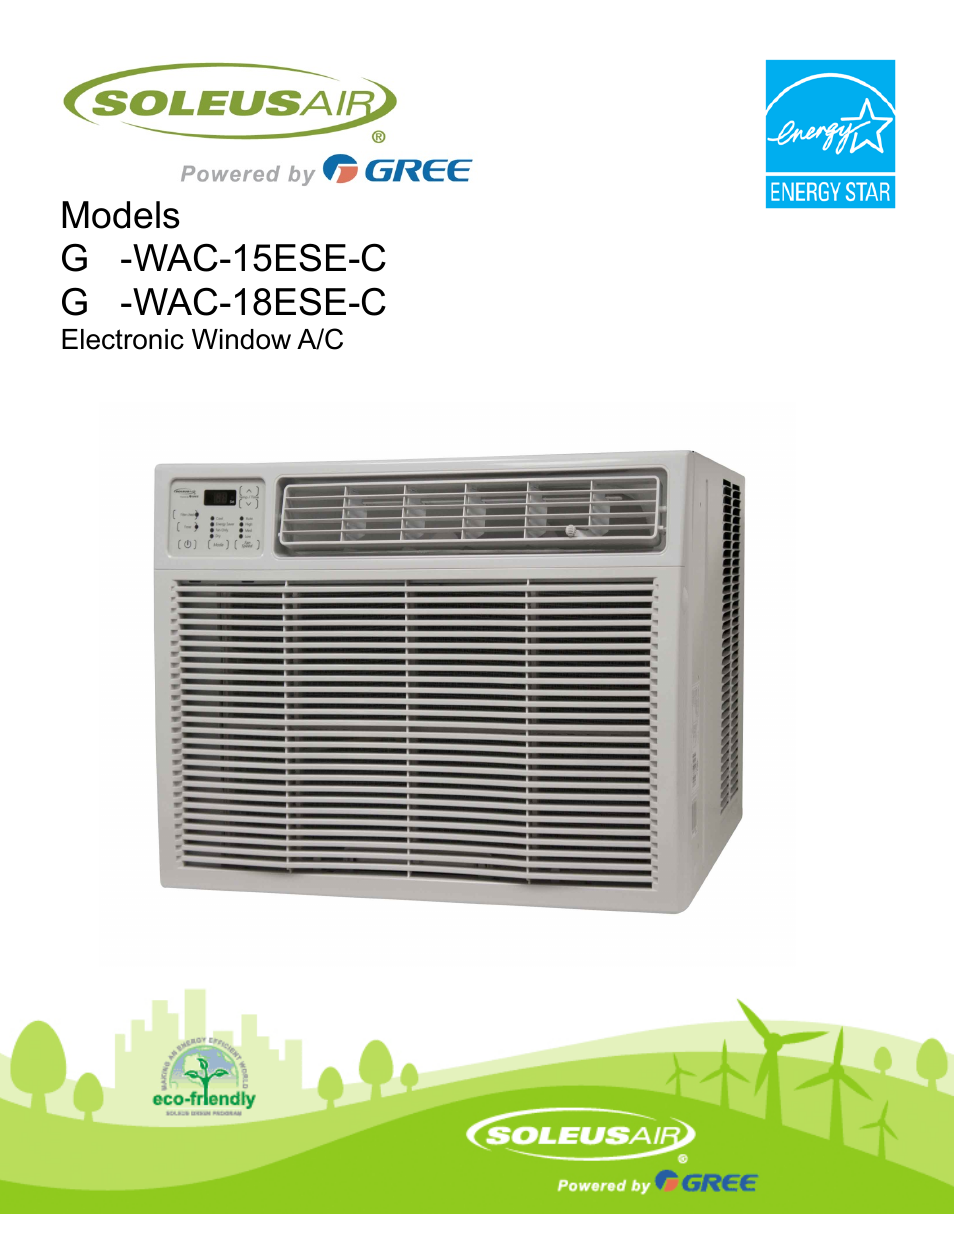 Soleus Air Powered by Gree Electronic Window A/C GM-WAC-15ESE-C User Manual  | 24 pages | Also for: Powered by Gree Electronic Window A/C GM-WAC-18ESE-C